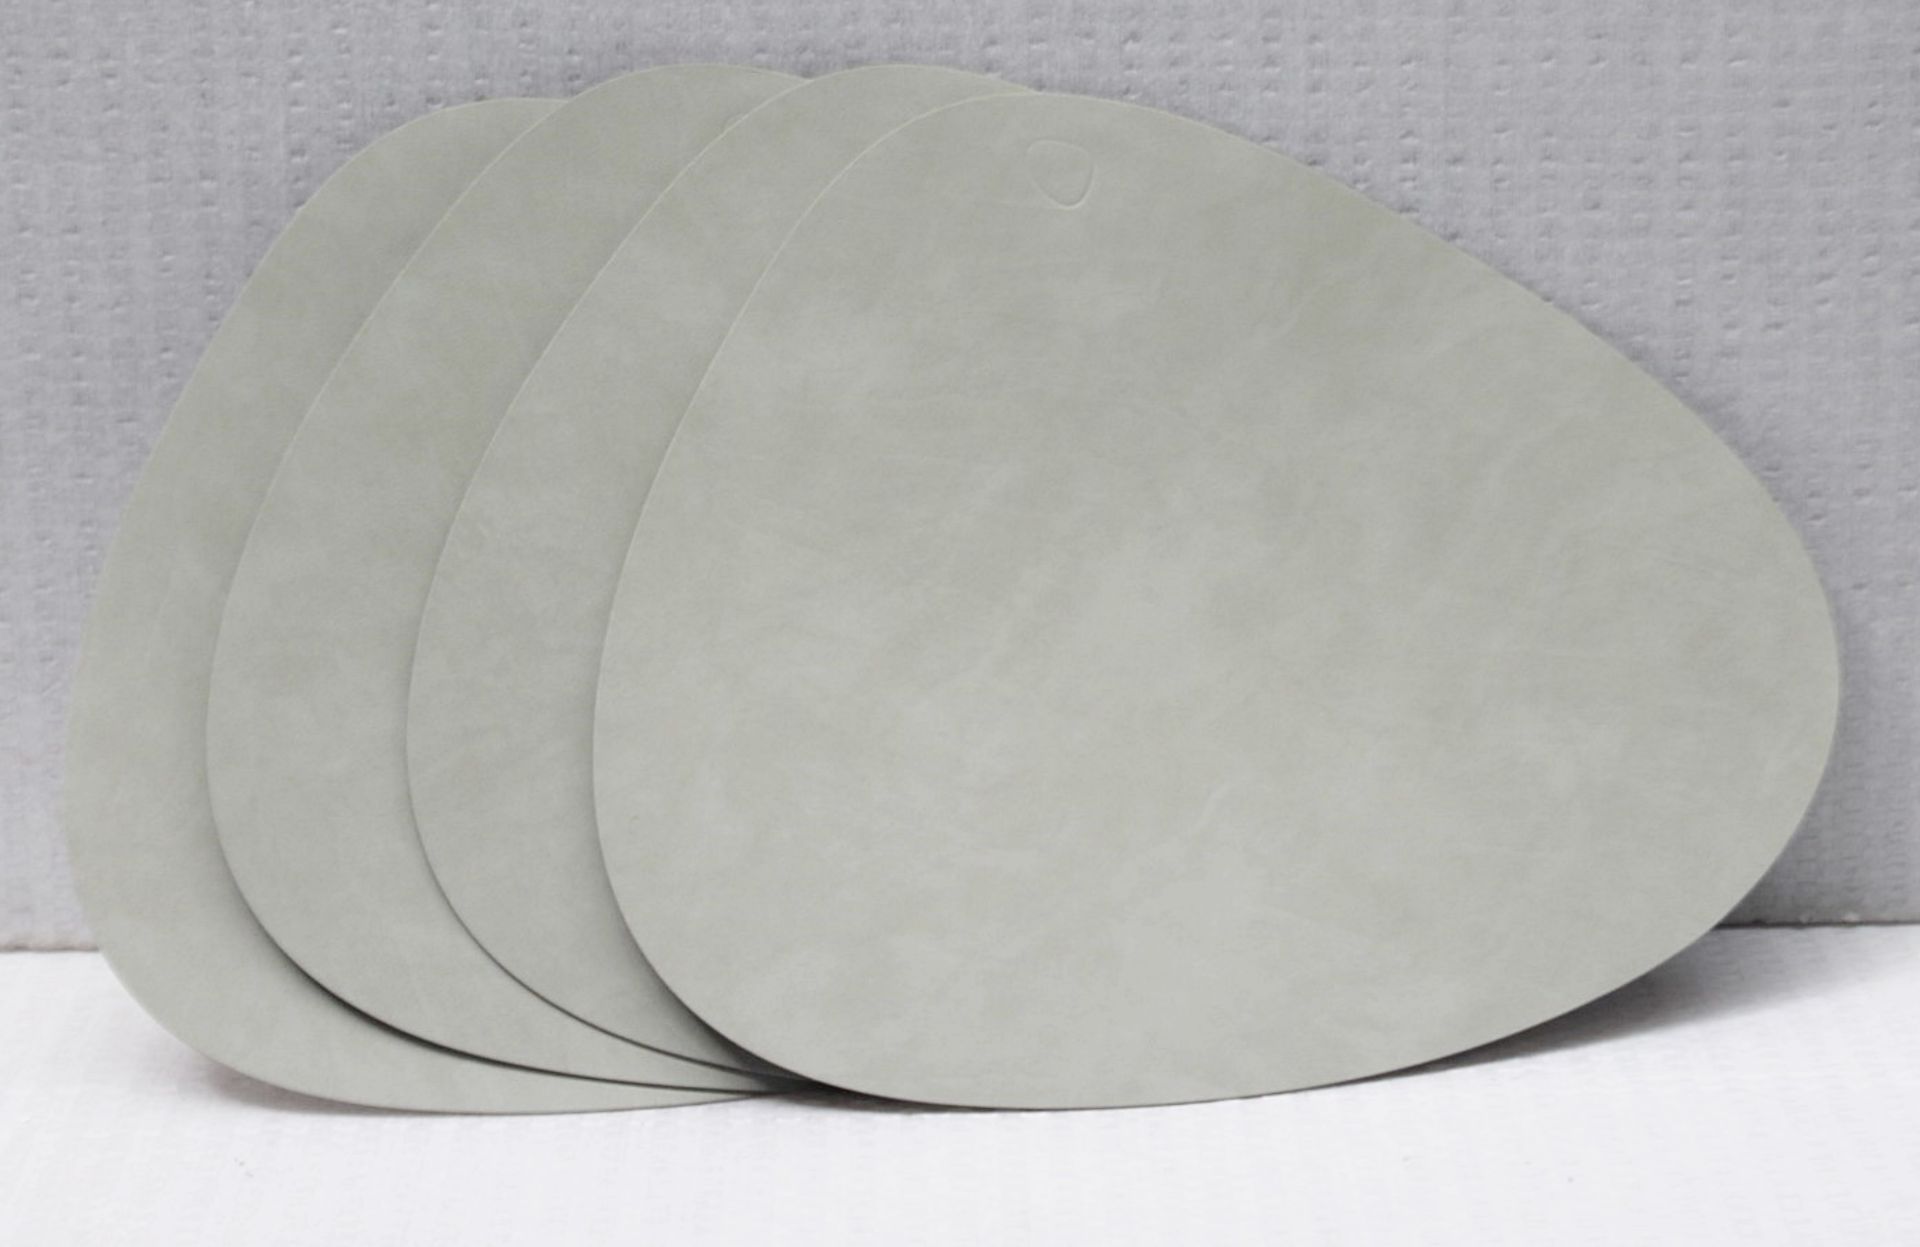 Set of 4 x LIND DNA 'Nupo' Leather Curved Table Mats, In Olive Green - Original Price £72.95 - Ref: - Image 2 of 5